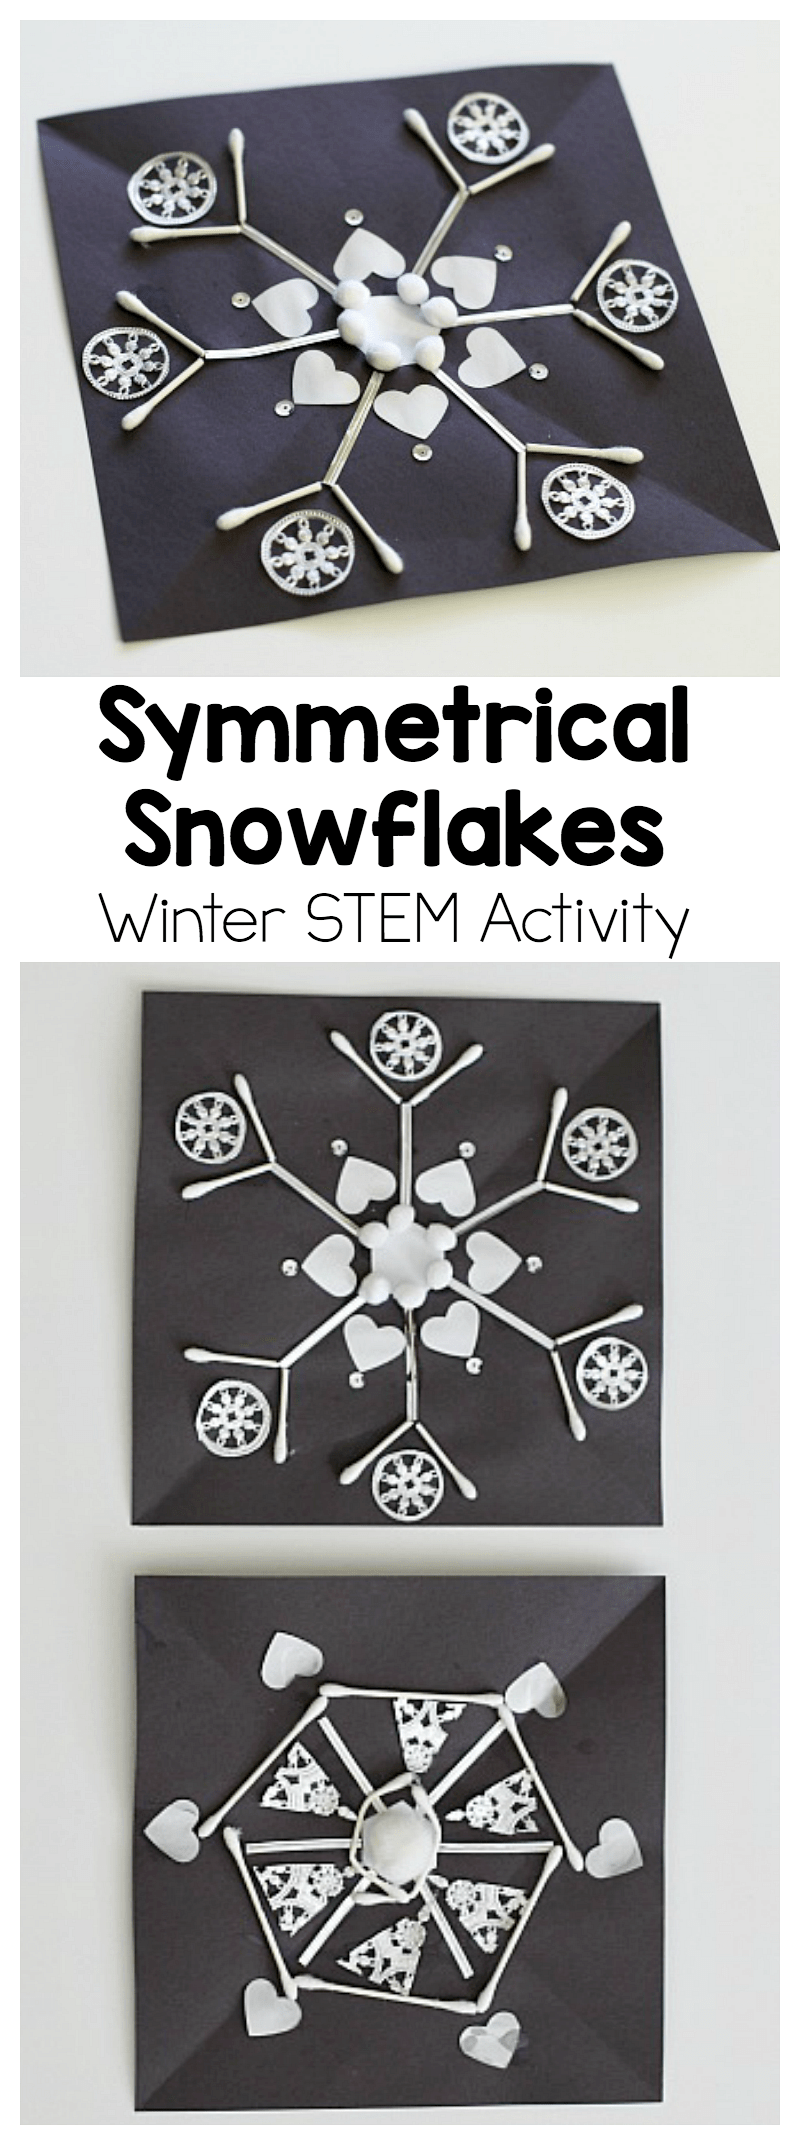 Winter STEAM activity for kids: Make symmetrical snowflakes